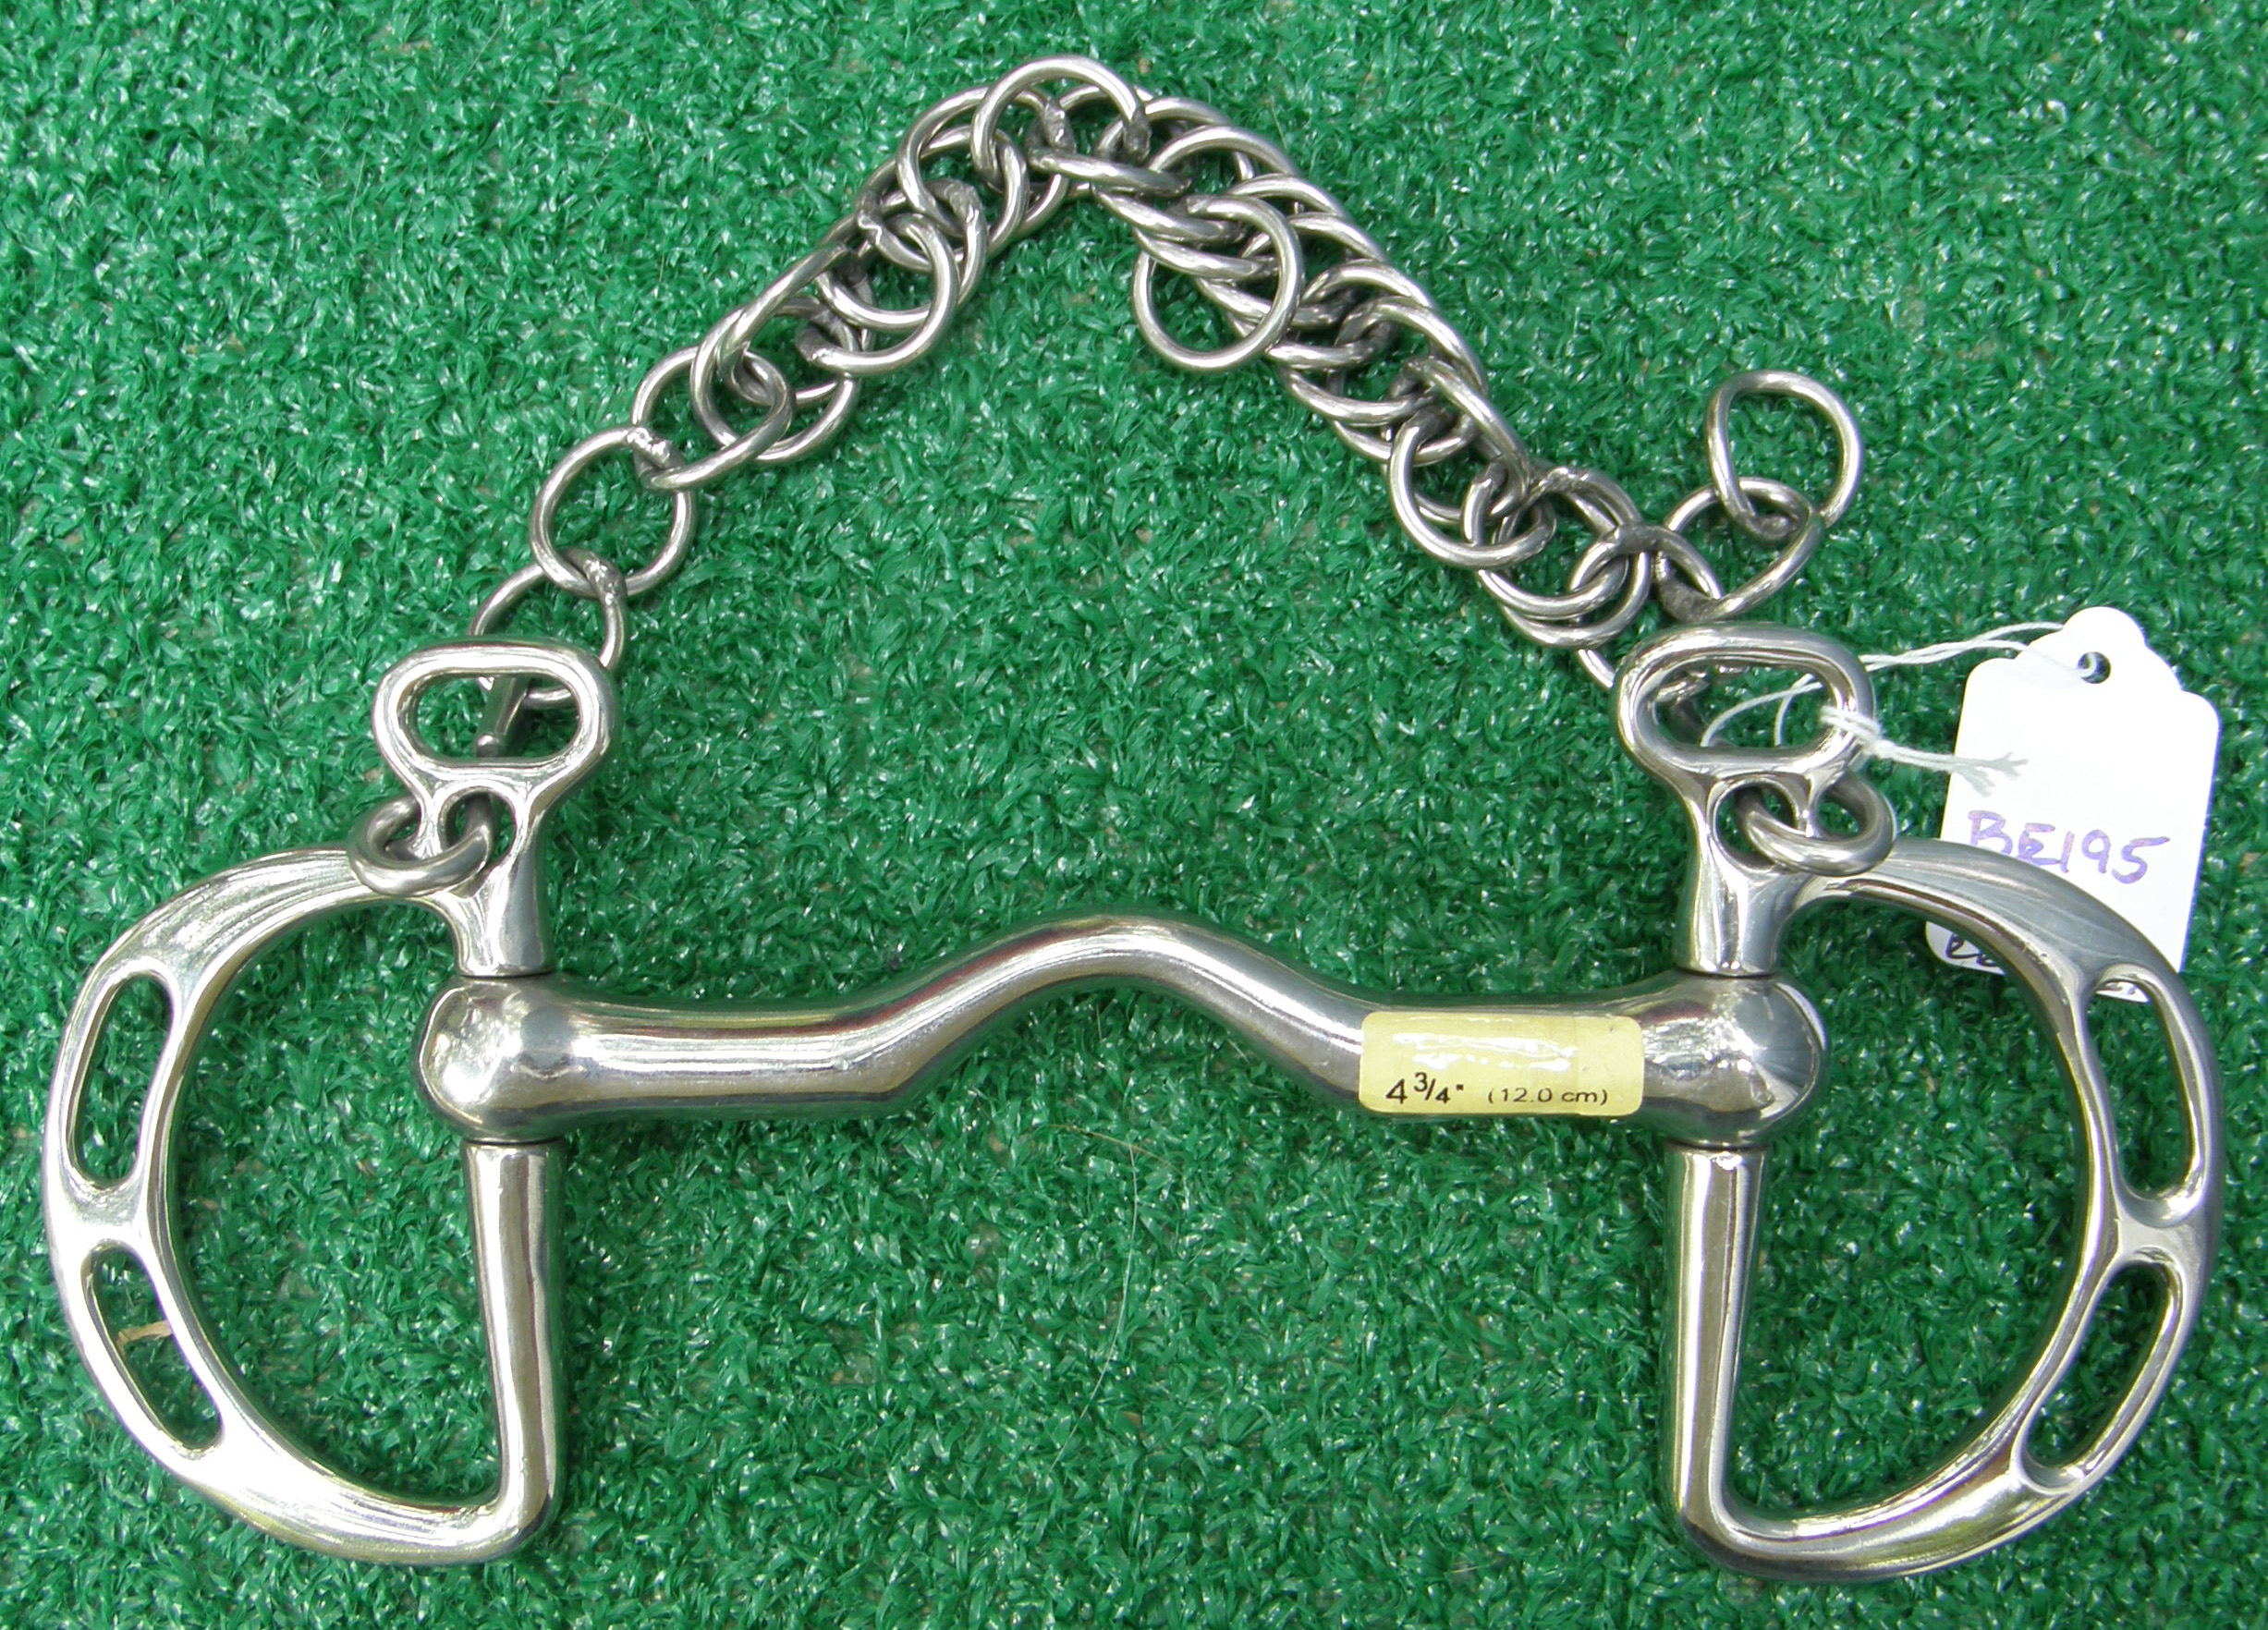 4 ¾” Low Port Slotted Uxeter Kimberwicke Bit with Curb Chain